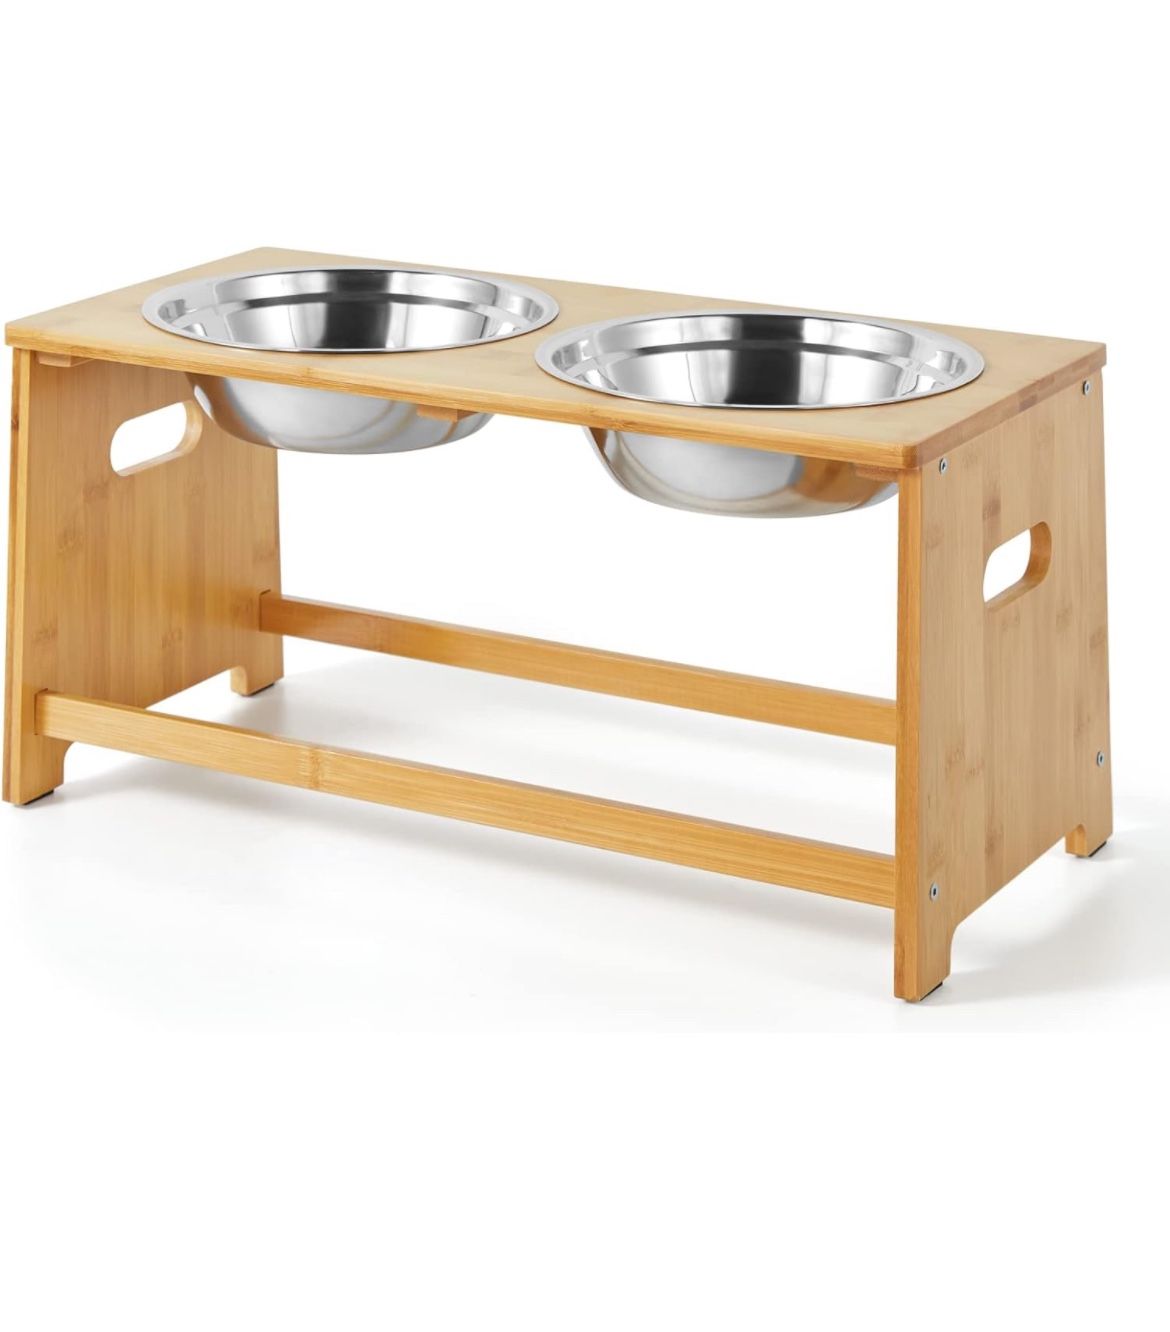 Brand new Dog Bowls,Raised Dog Bowl Stand,Bamboo Dog Food Water Bowls，Pet Feeder for Food and Water